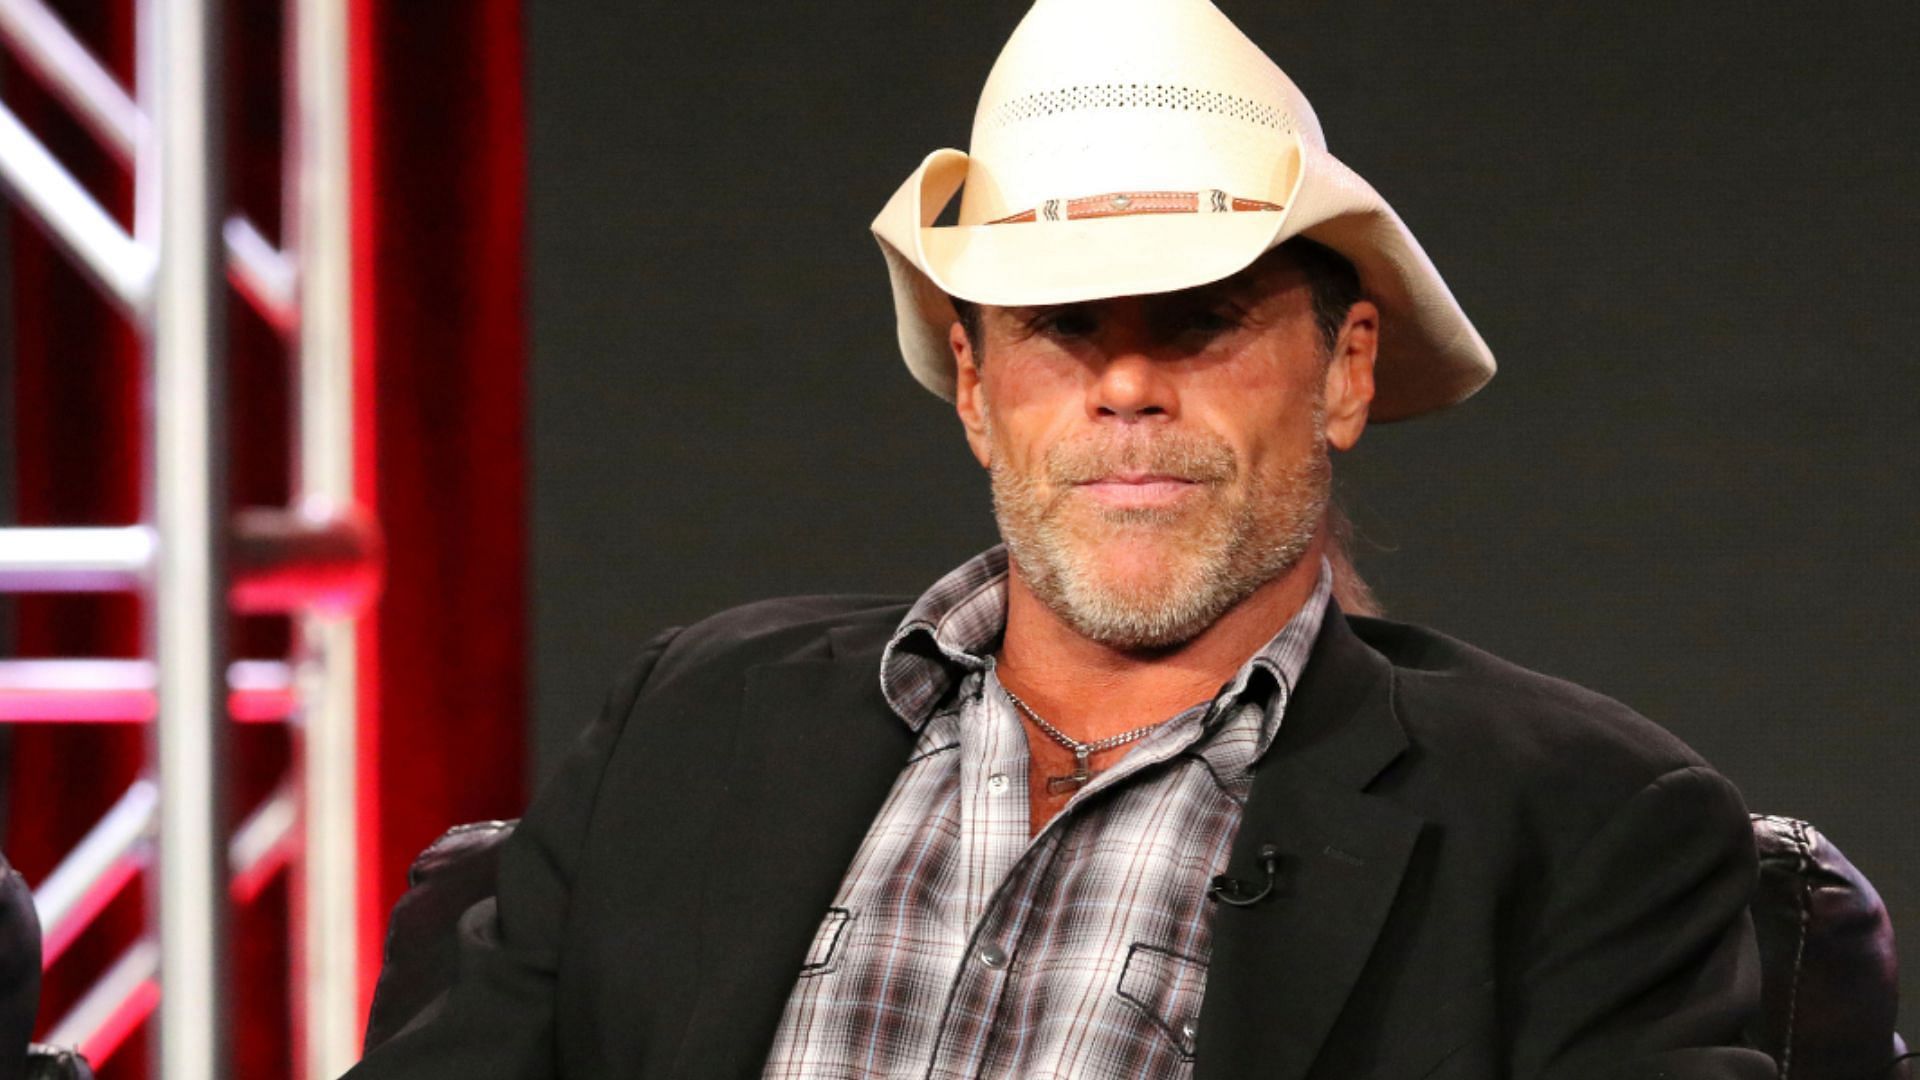 WWE Hall of Famer Shawn Michaels is cited as one of the GOAT